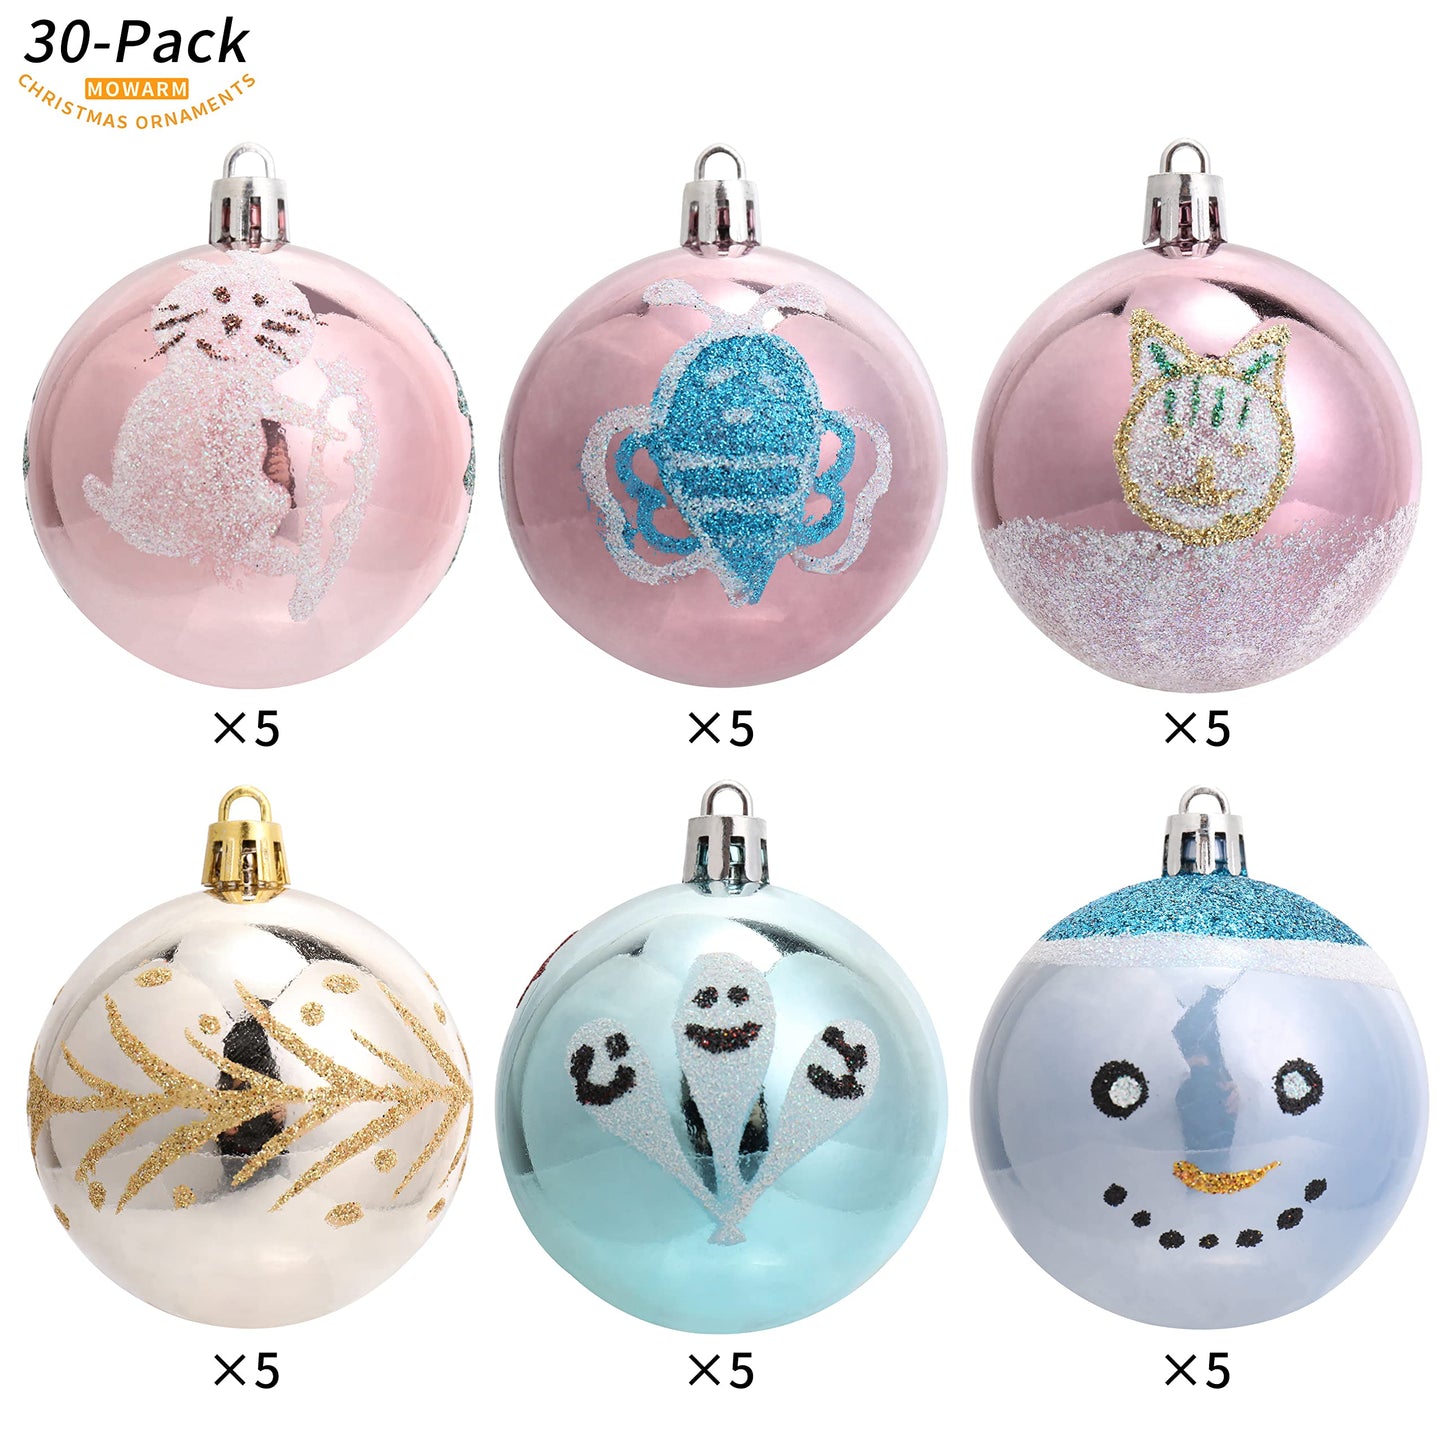 MOWARM 60mm/2.36" Exquisite Contrast Color Theme Painting & Glittering Christmas Ball Ornaments Decorative Xmas Balls Set (30 Counts)-Colourful